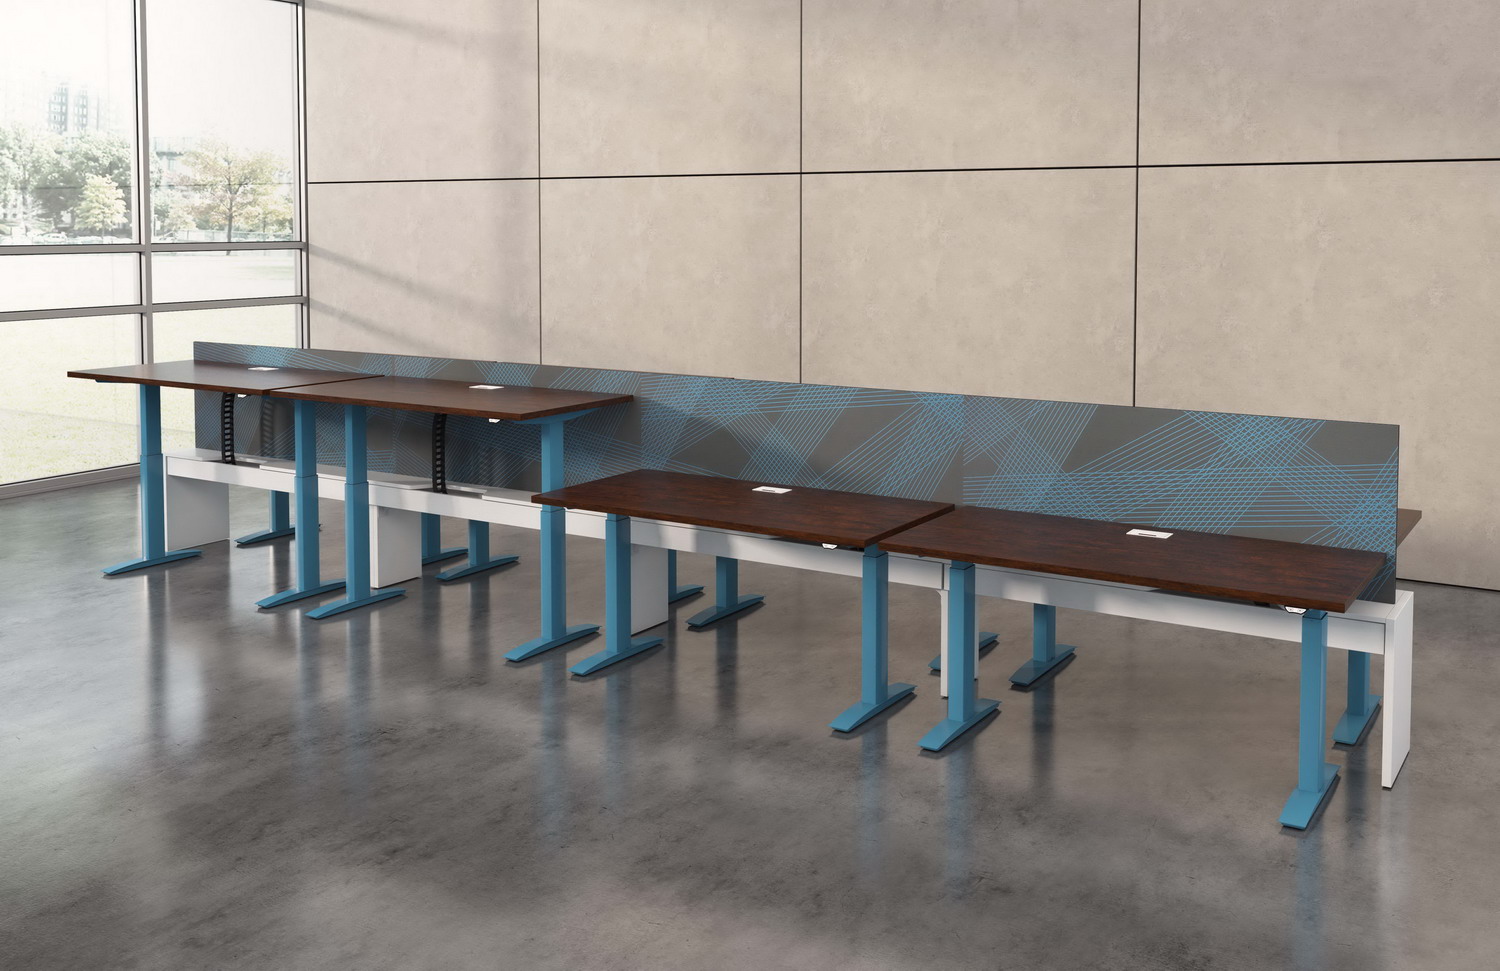 Contract furniture rendering of 4 height adjustable desks with fixed graphic dividers.